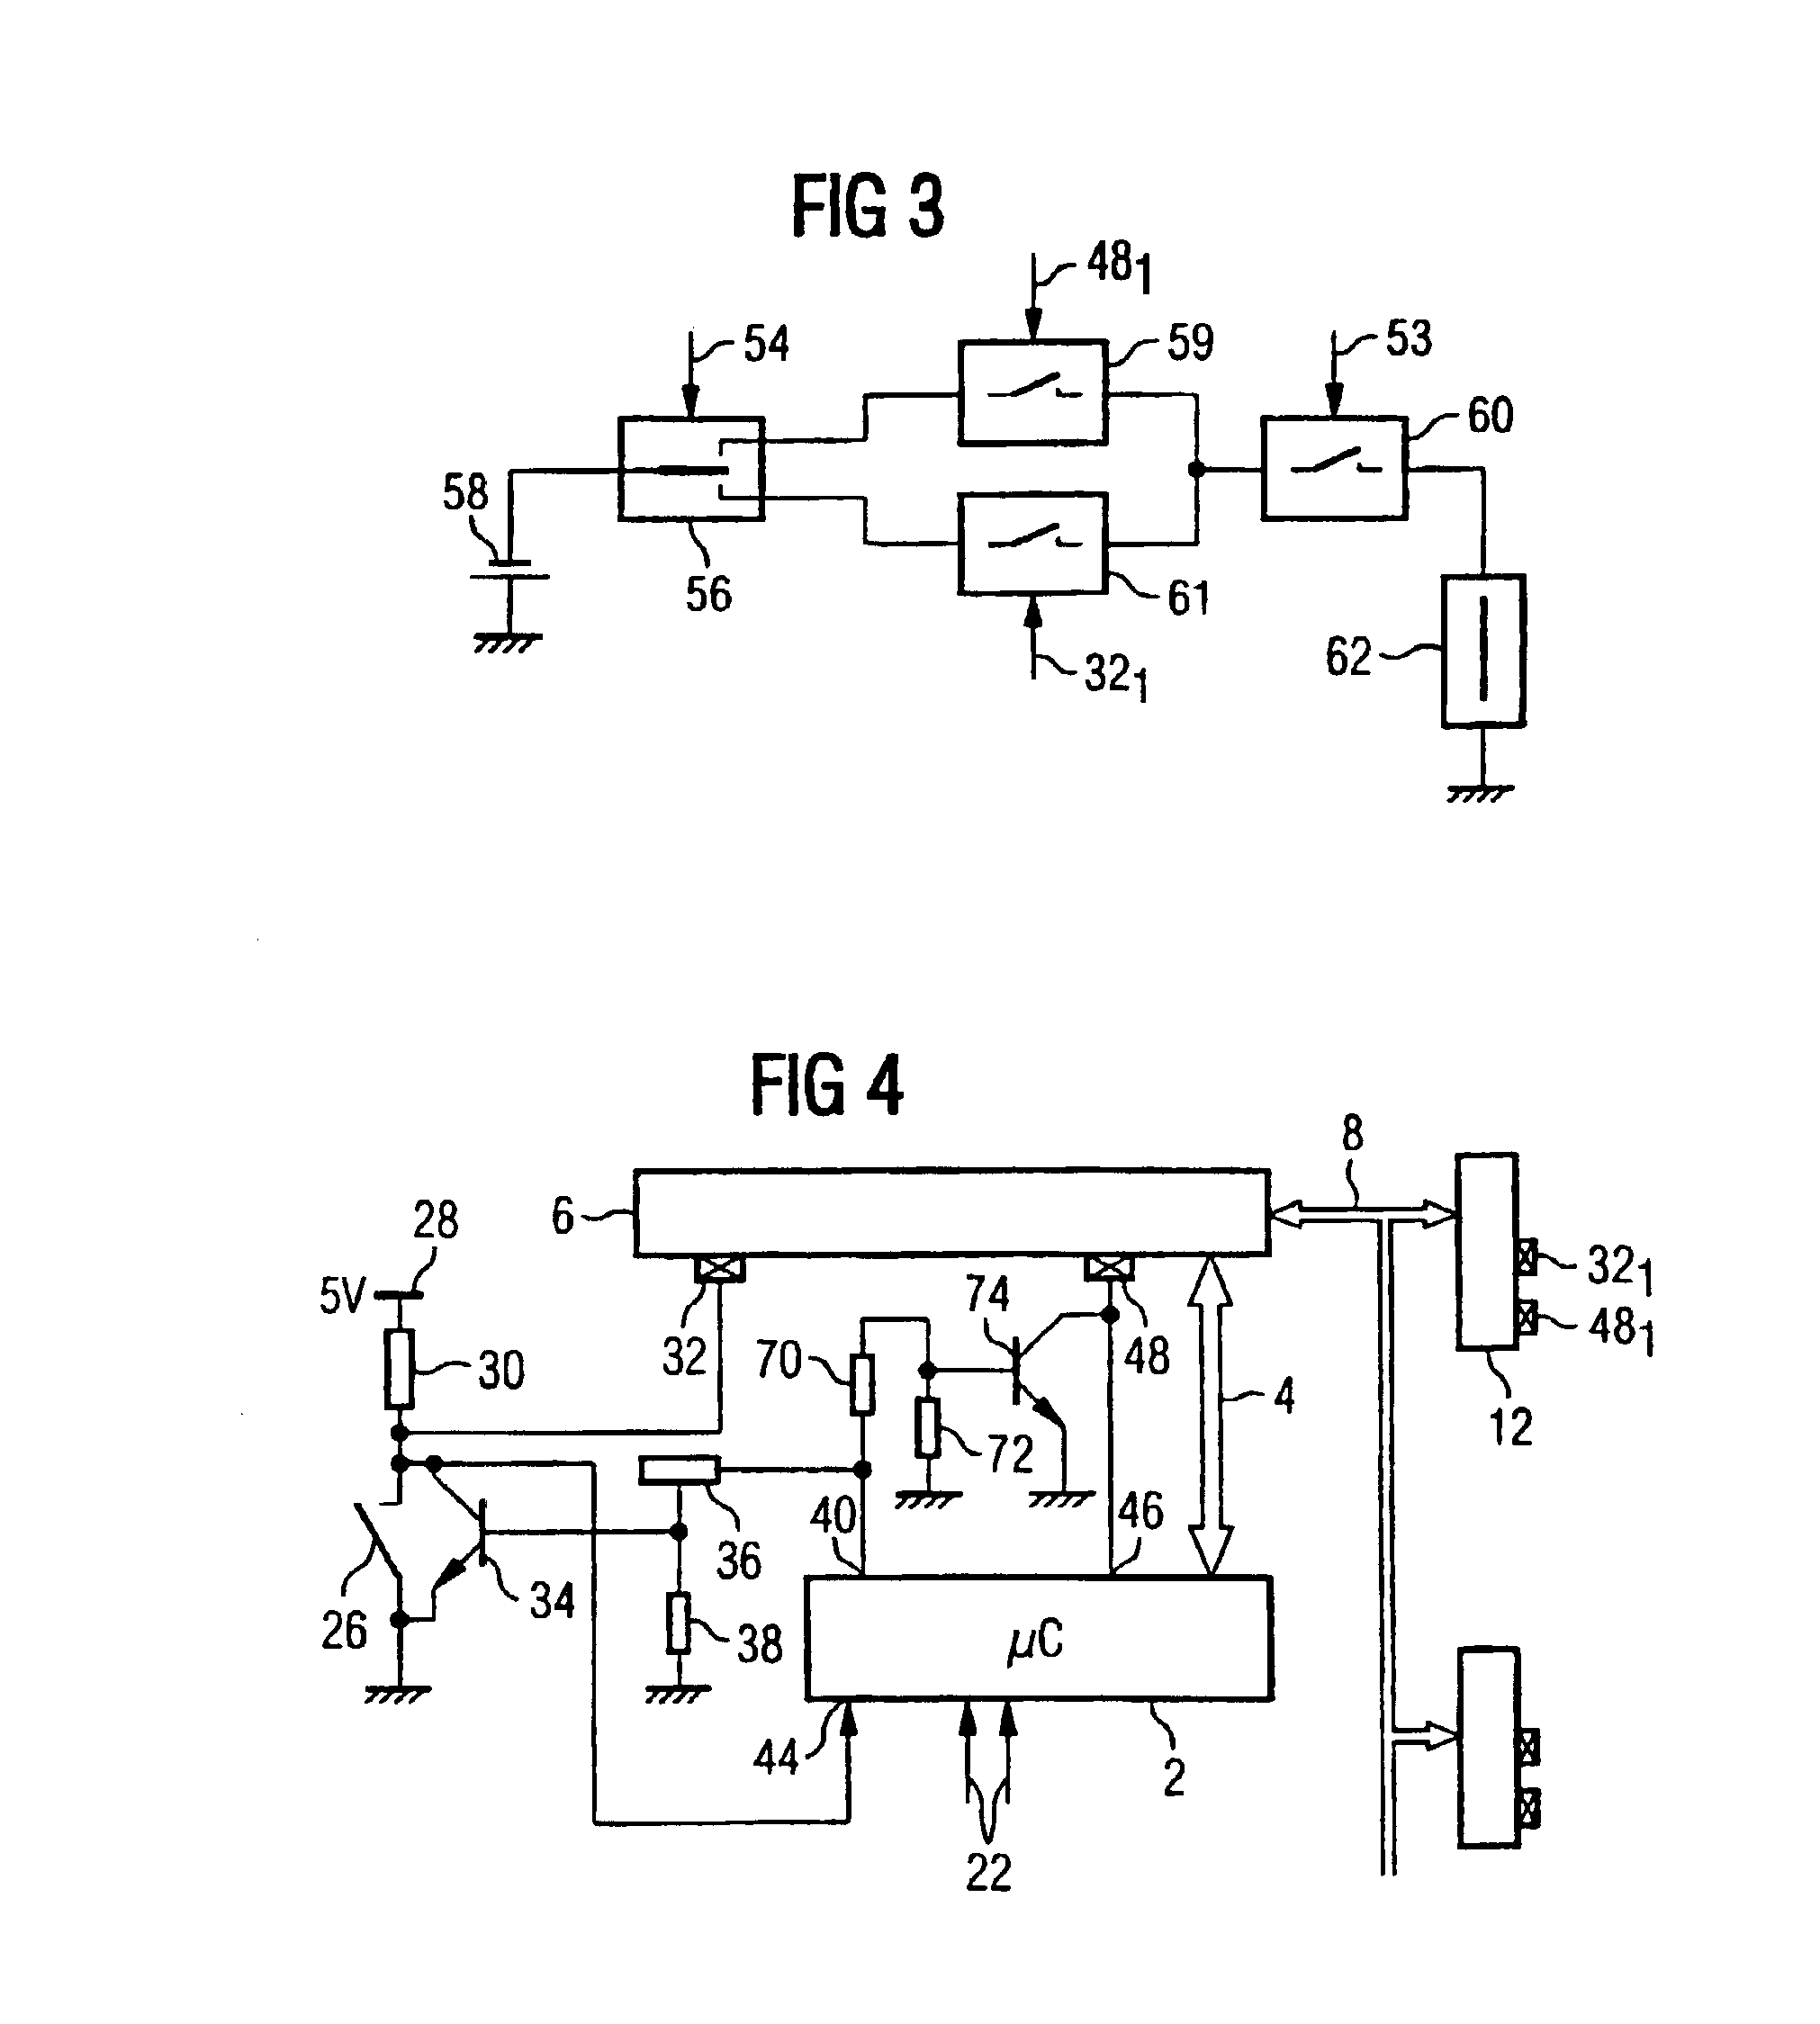 System for controlling the operation of modules using information transmitted from a control device via a data bus, a trigger device and a test circuit